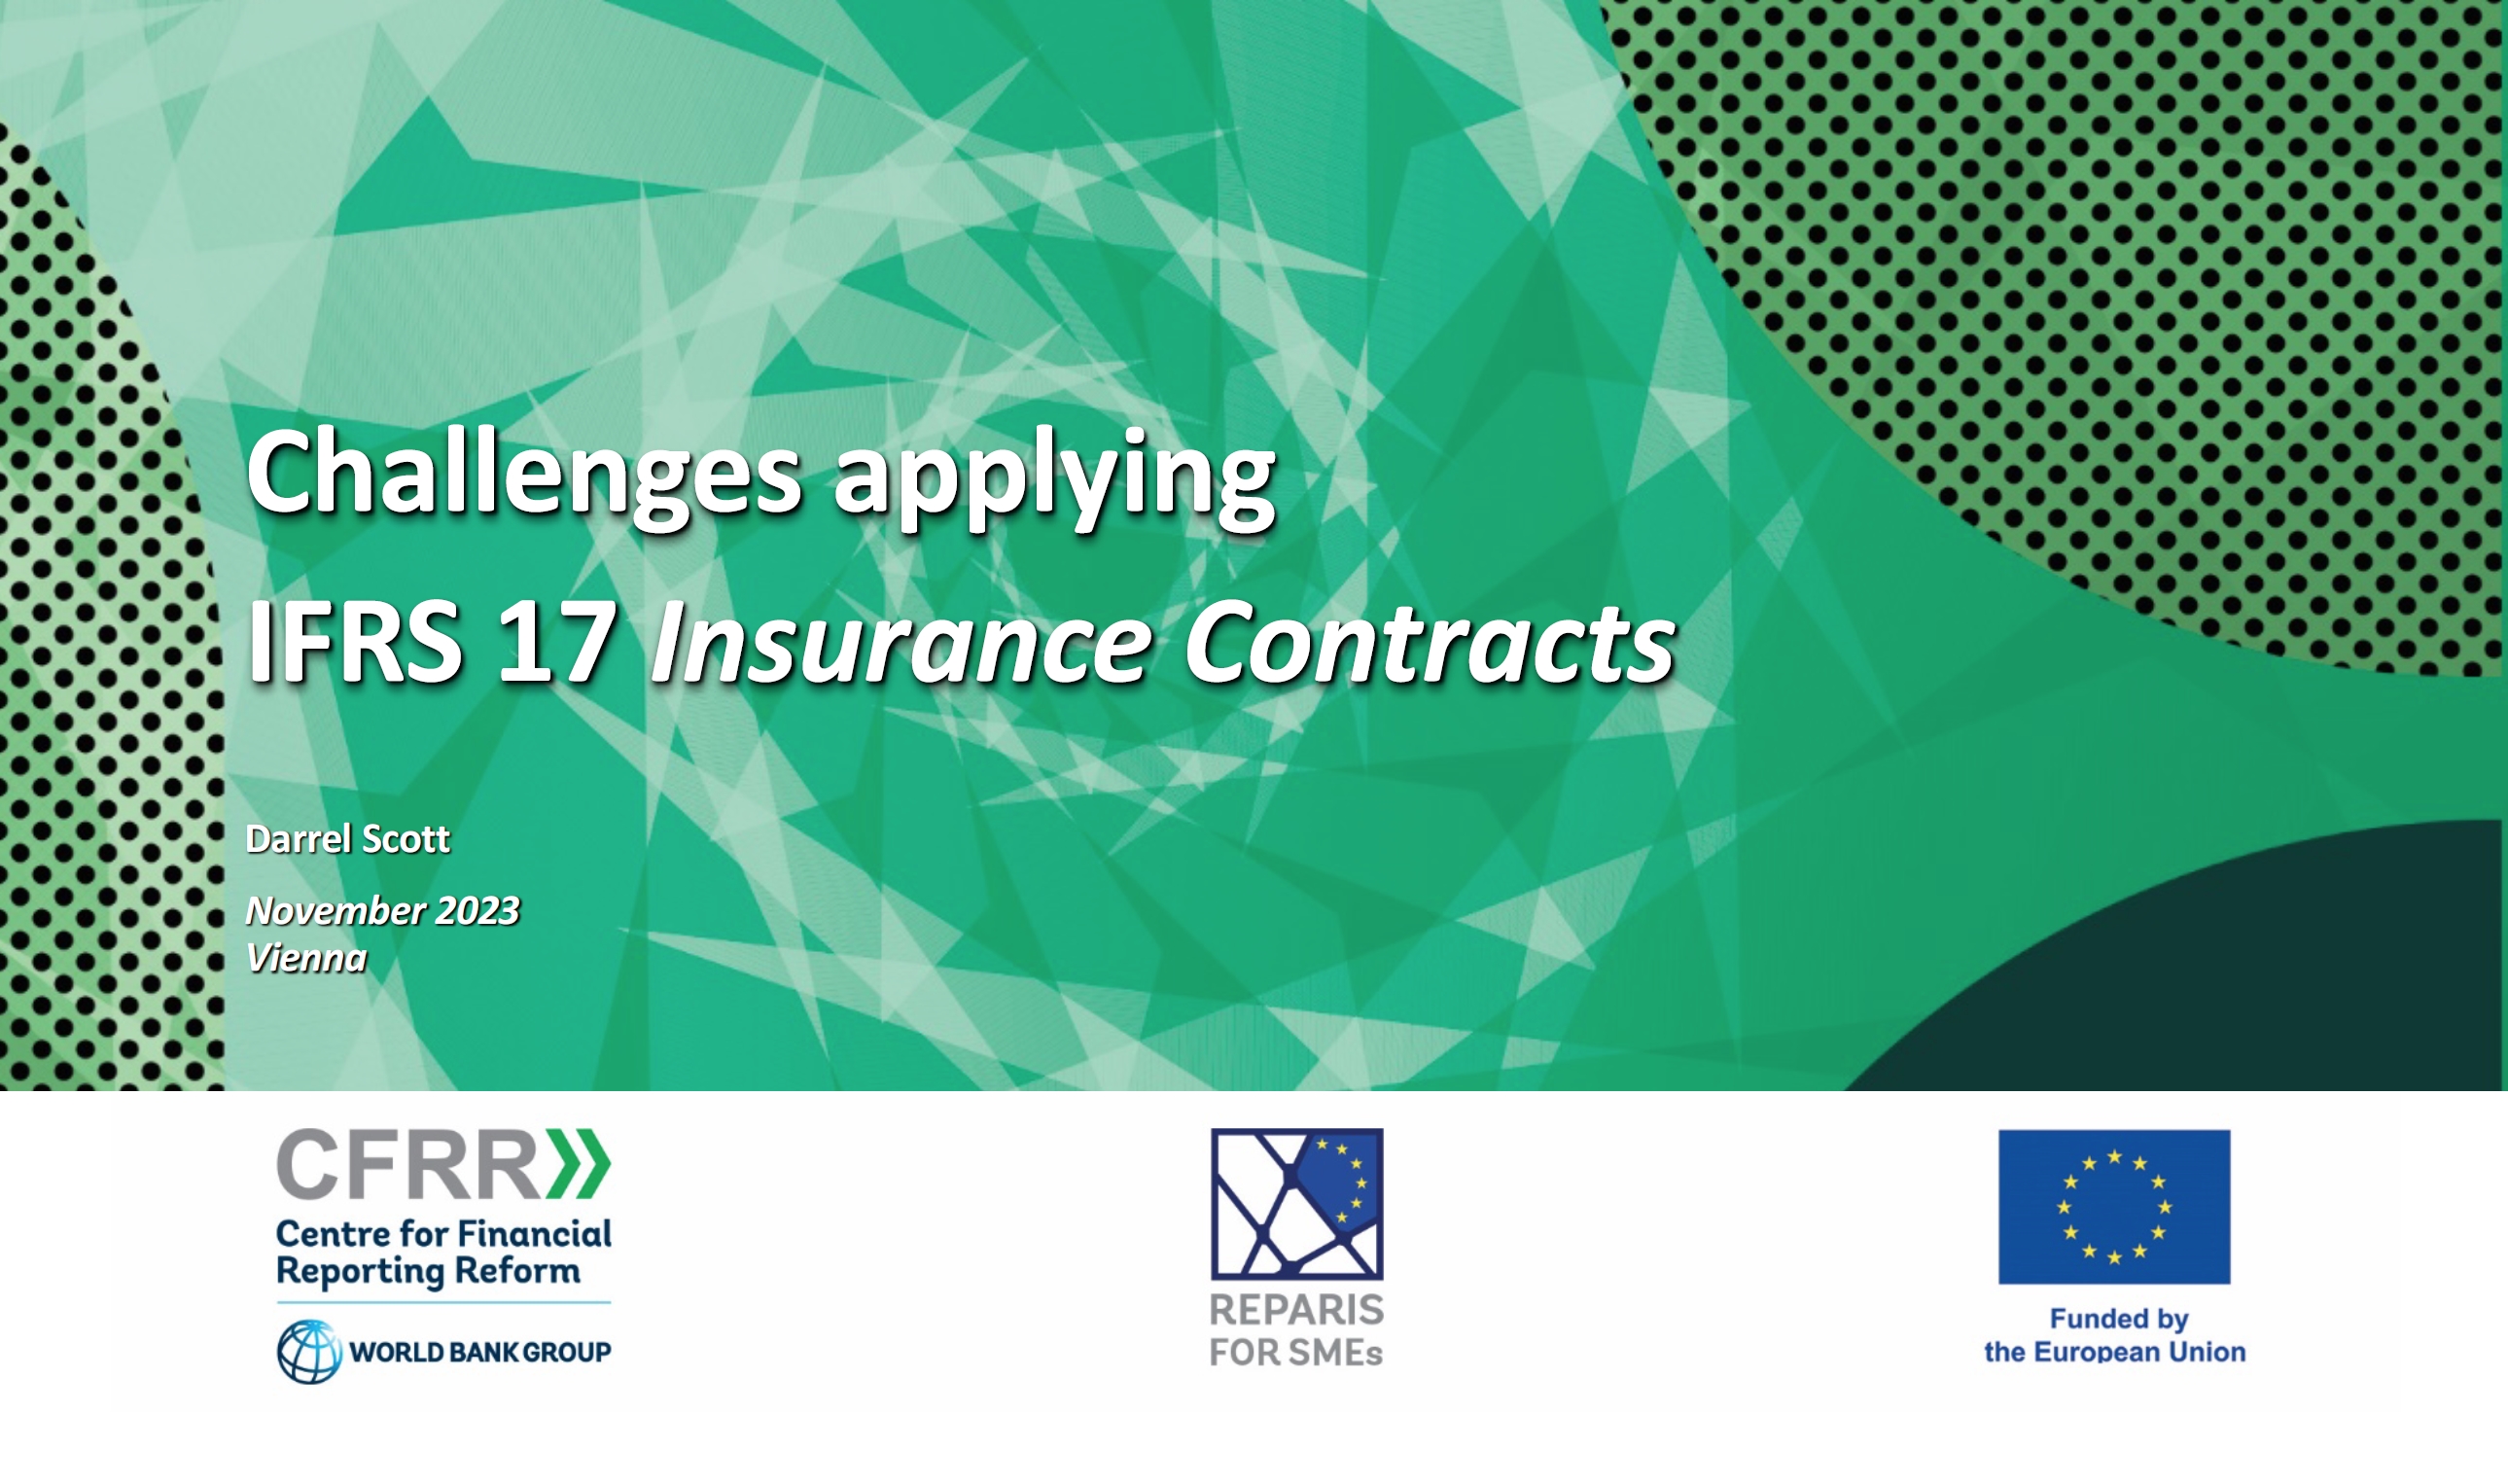 Challenges applying IFRS 17: Insurance contracts